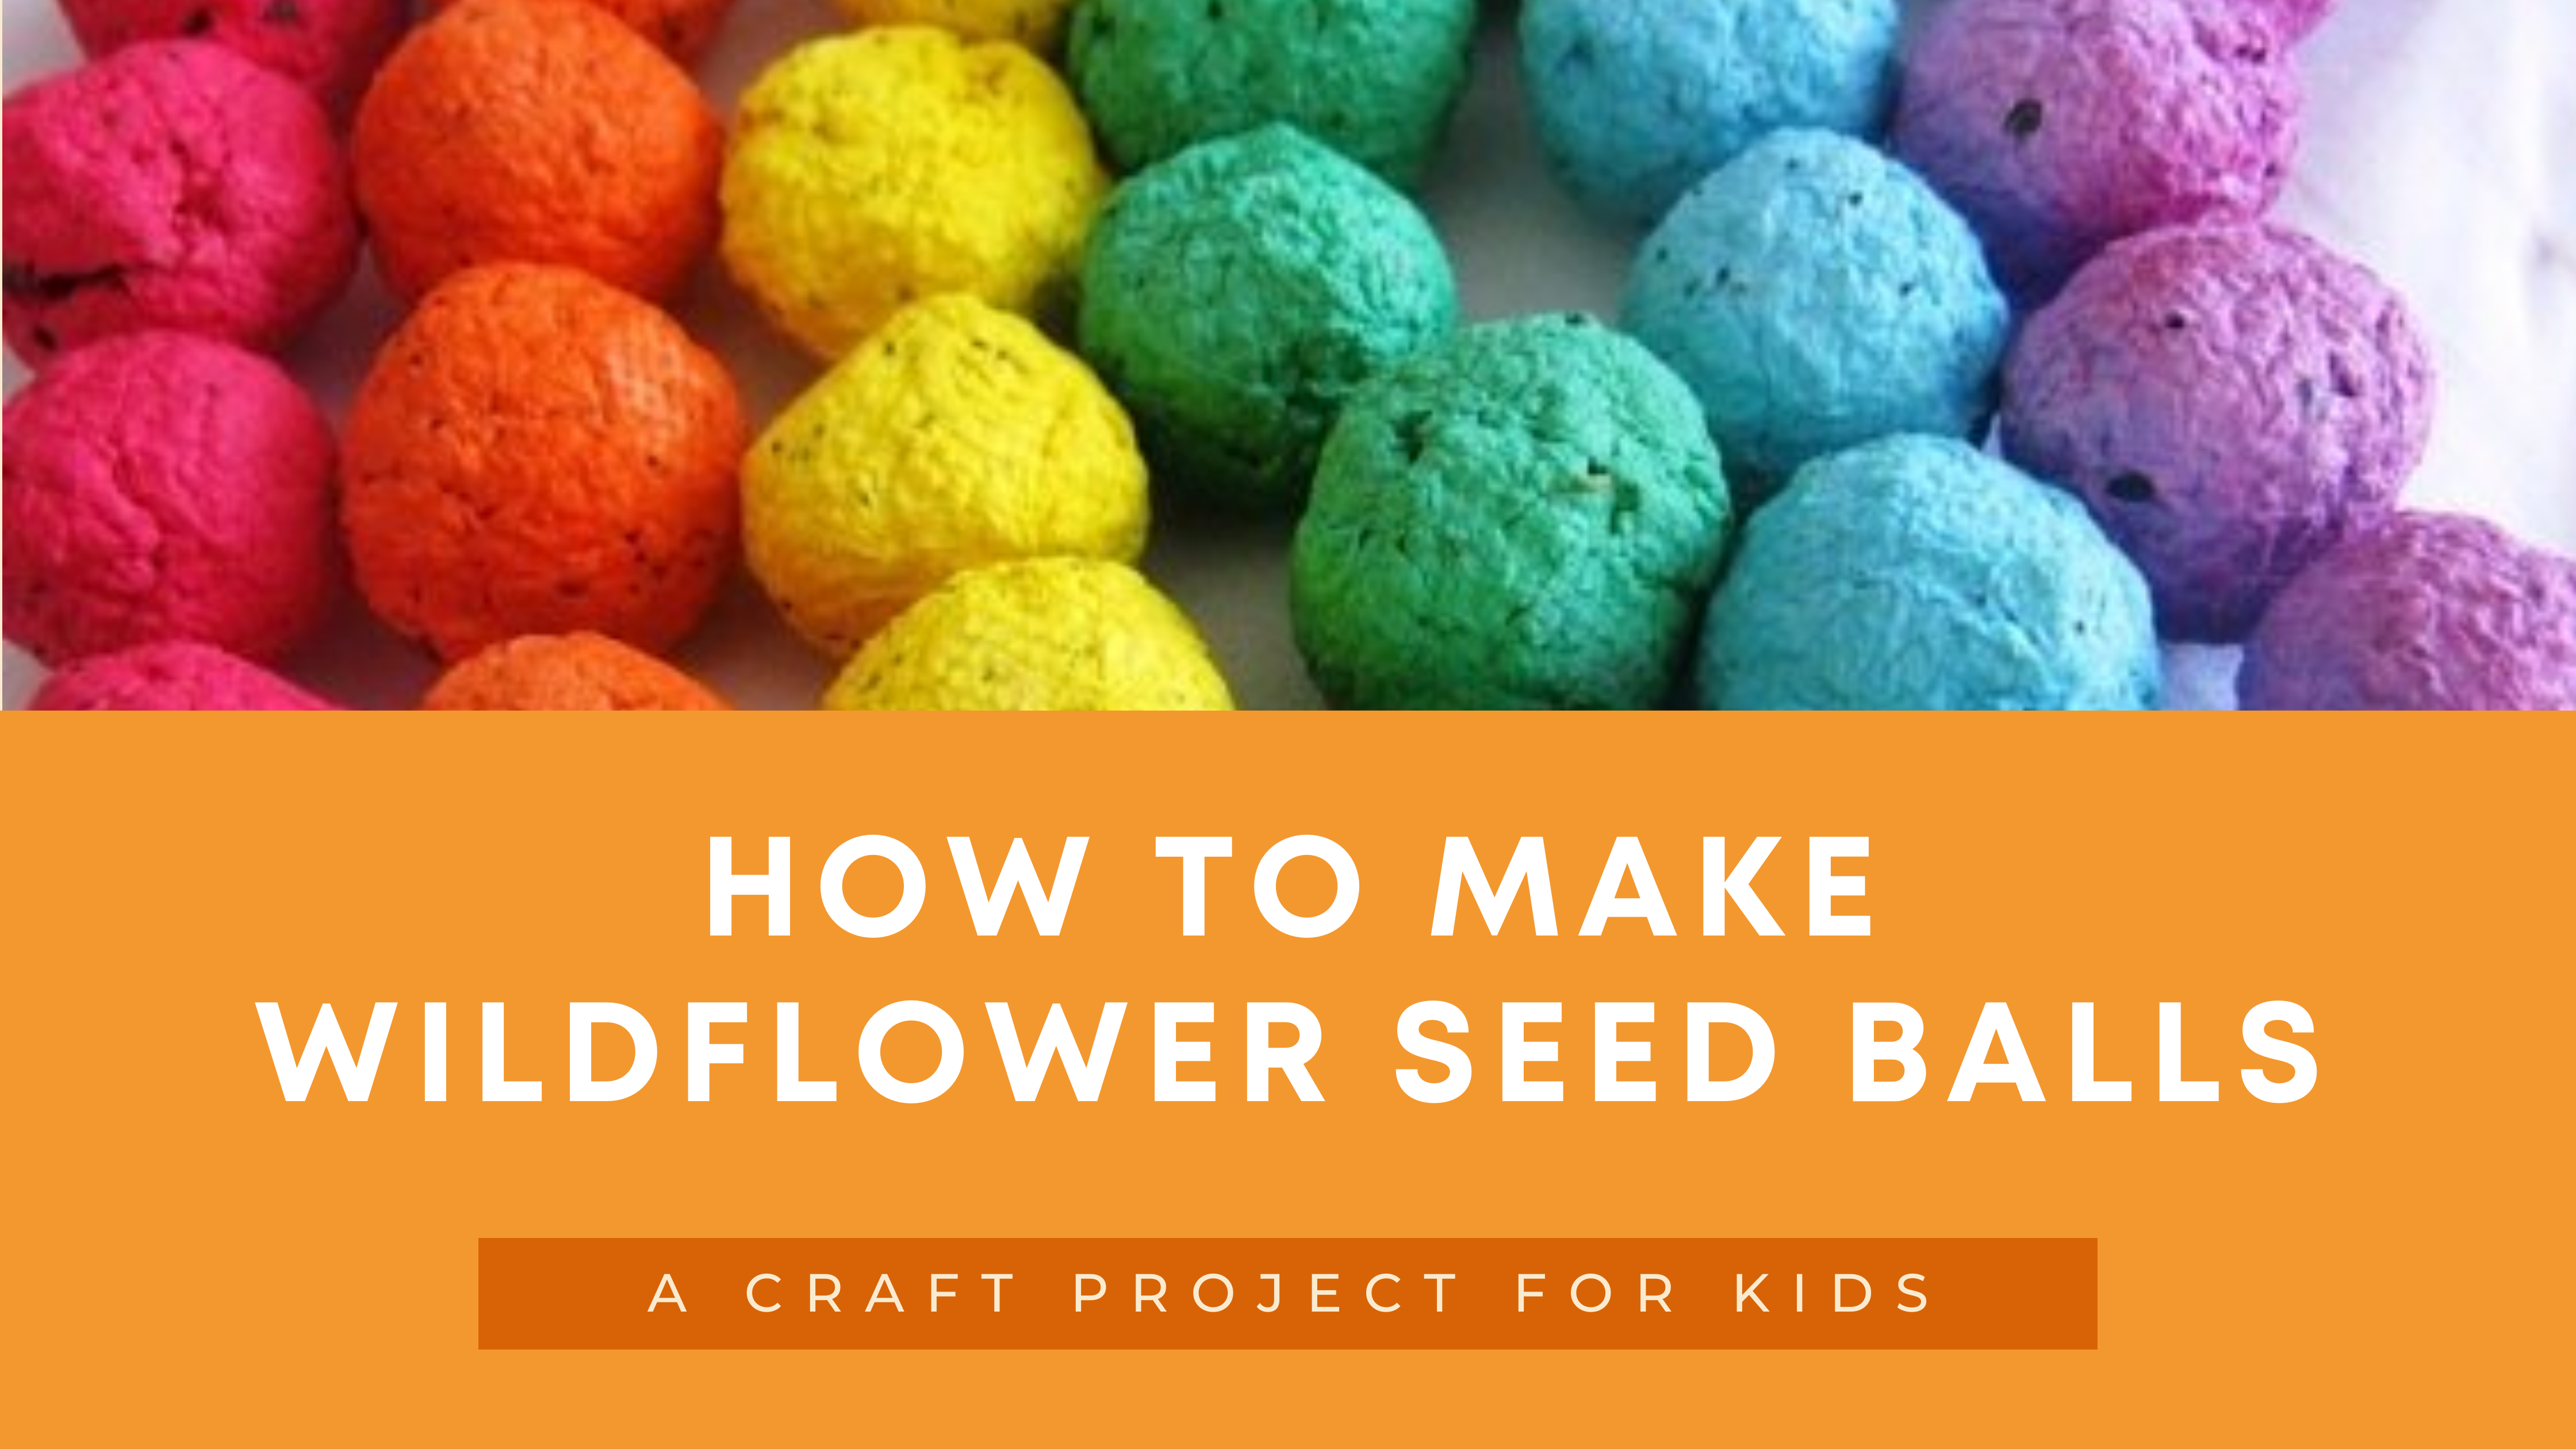 How to make wildflower seed balls